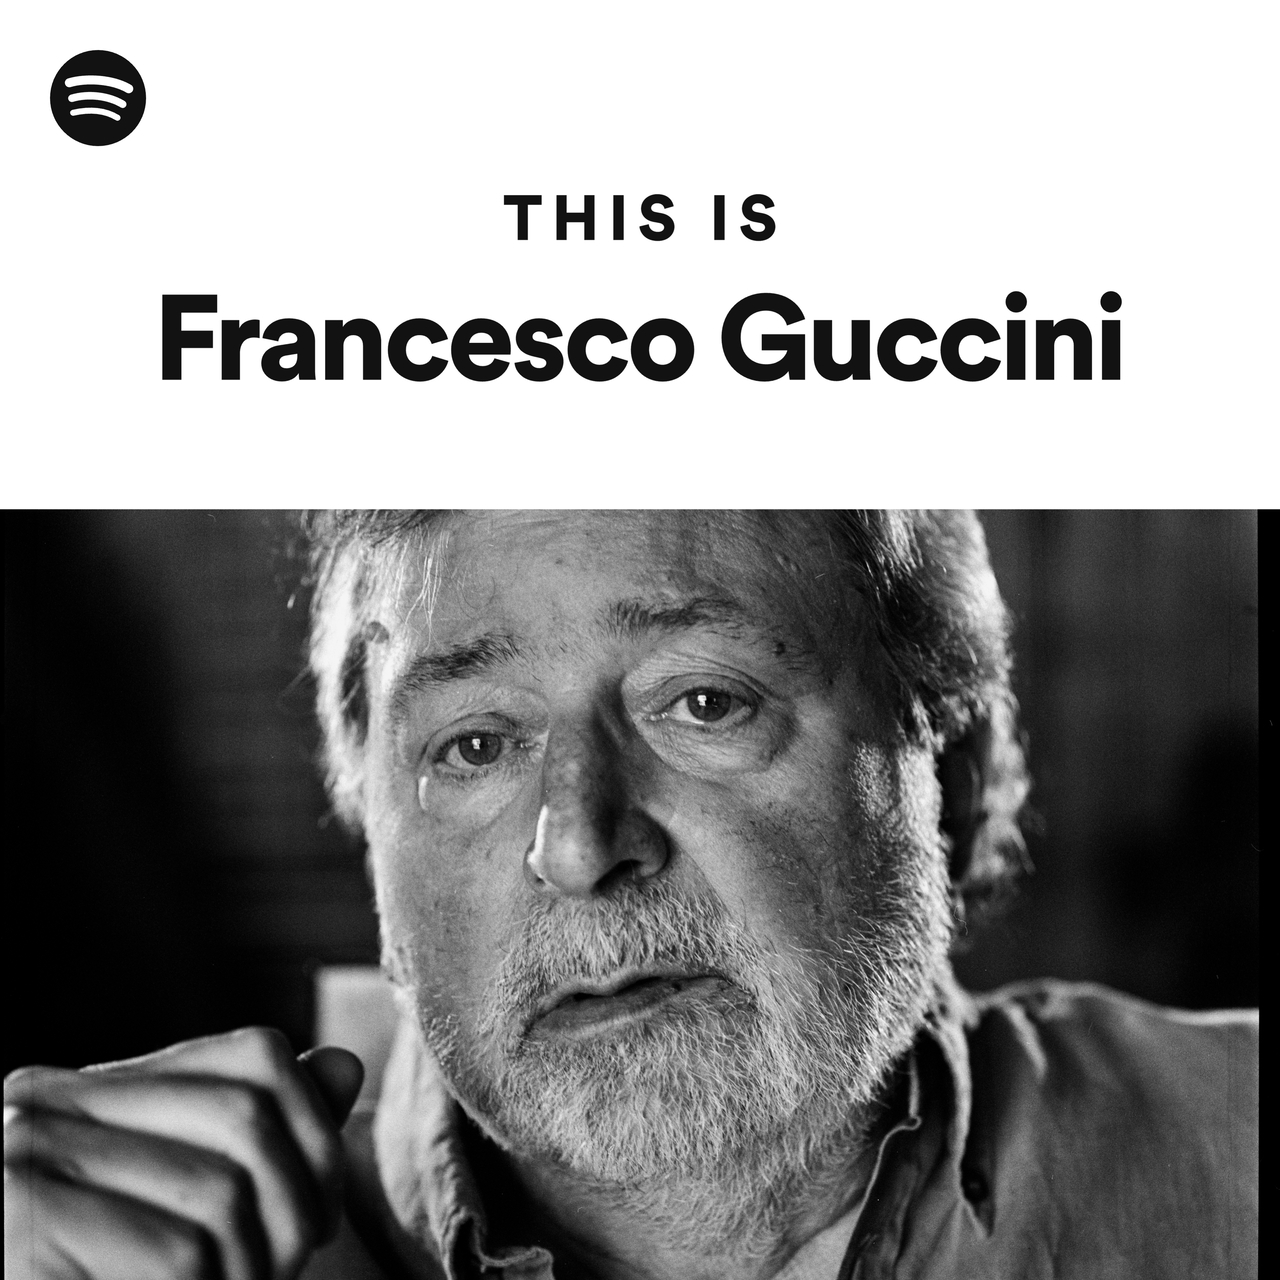 This Is Francesco Guccini